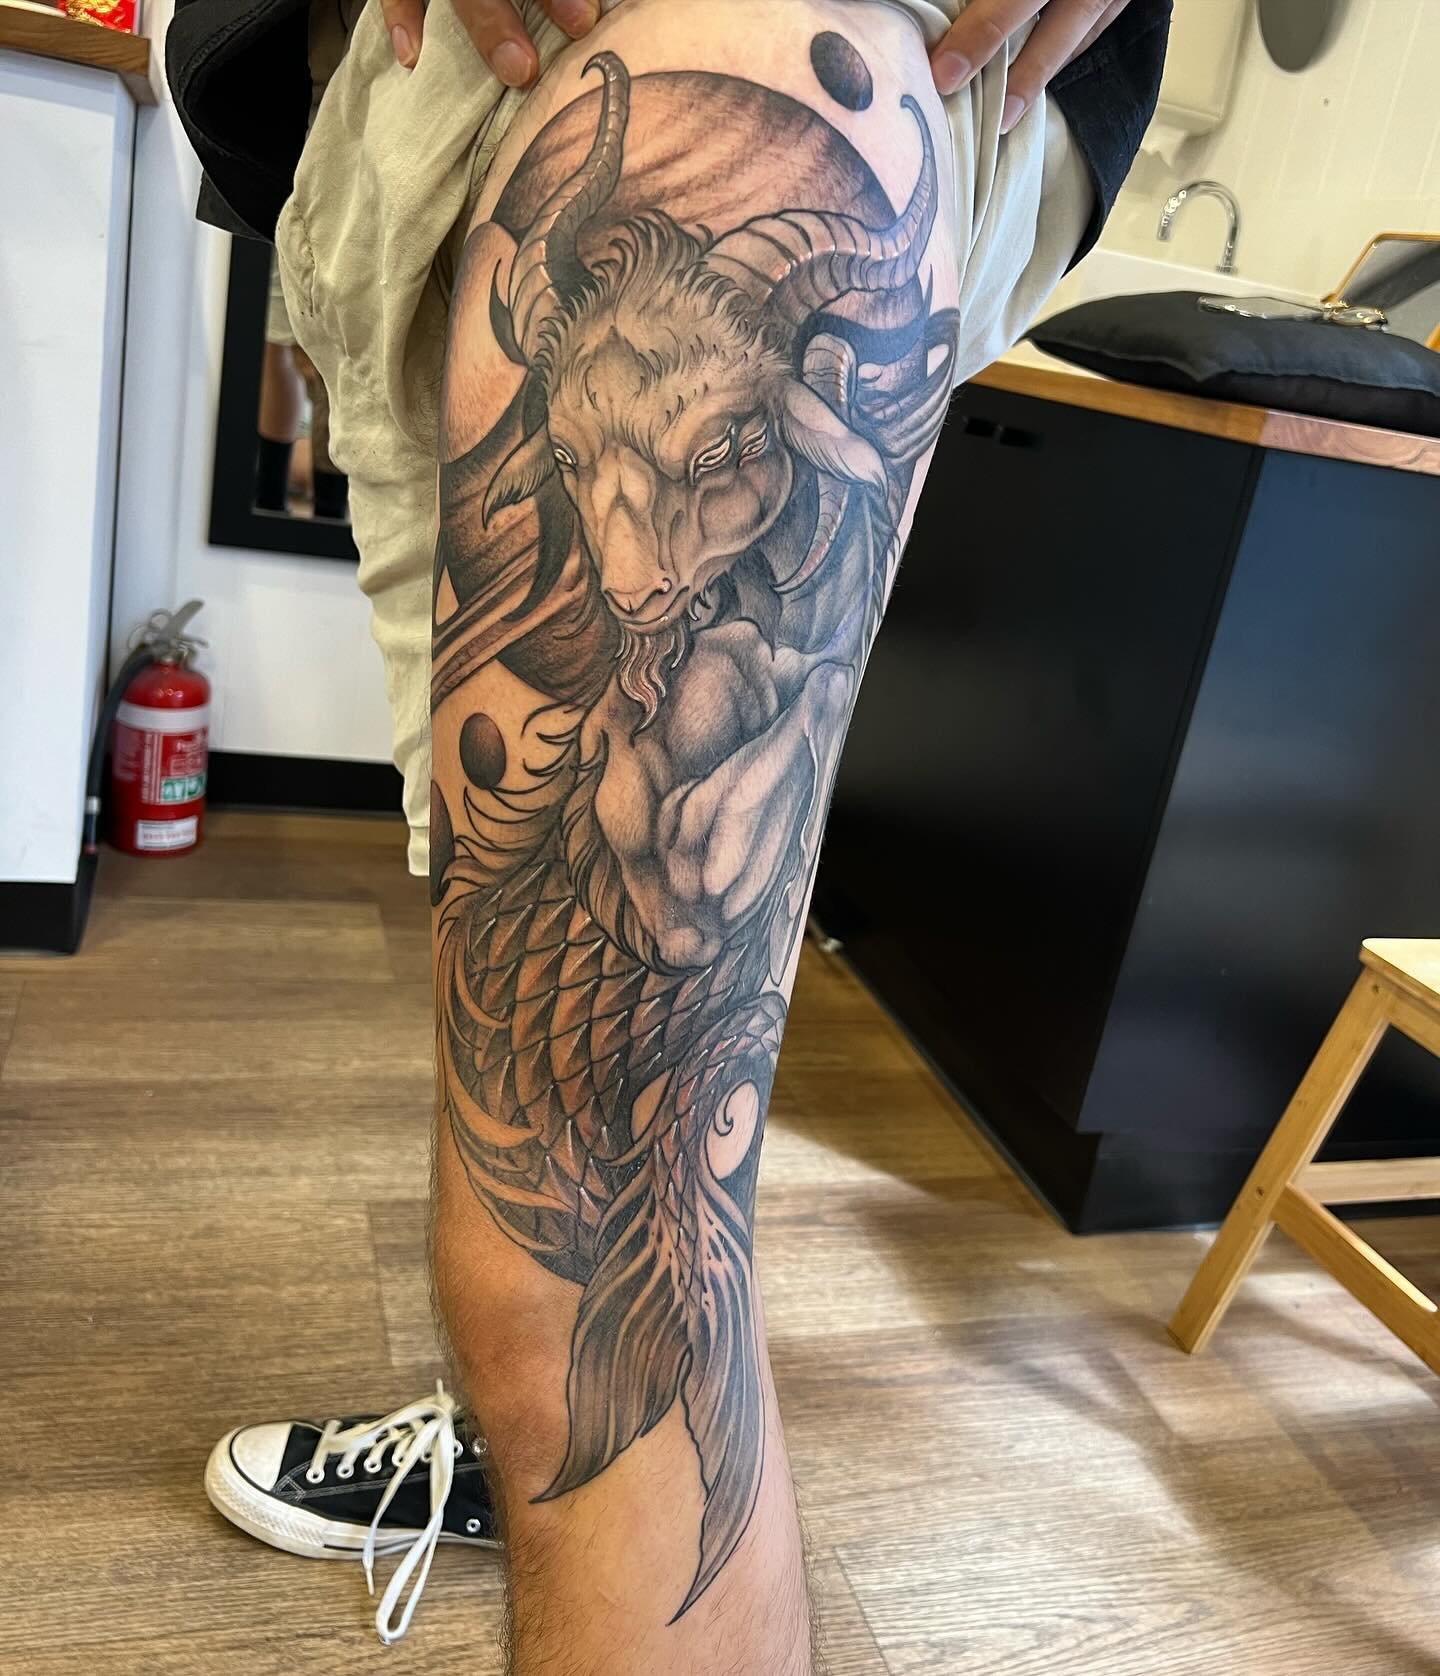 Massive Capricorn on the upper leg by Raul @_thelineandtheshade_ 
DM or call 07 5648 0626 to book in! Complimentary consultations always available during the week. 
&bull;
&bull;
&bull;
&bull;
&bull;
#new #fyp #tradtattoo #goldcoast #goldcoasttattoo 